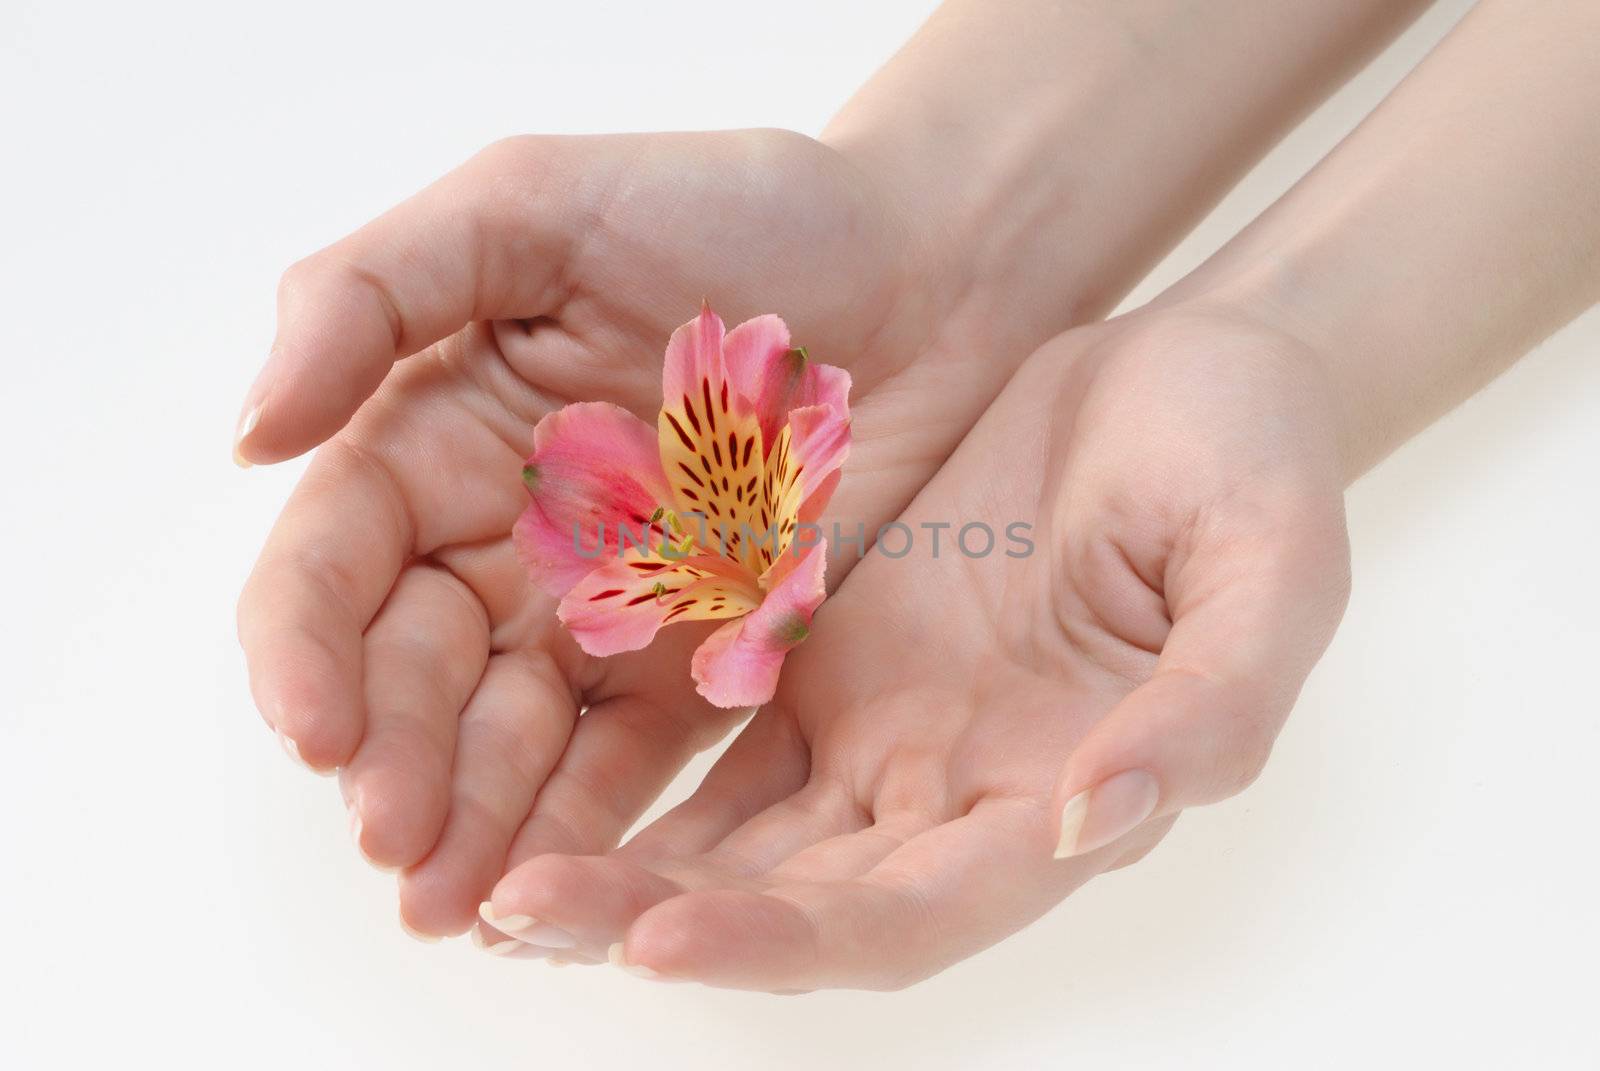 Woman hands holding a flower by kirs-ua